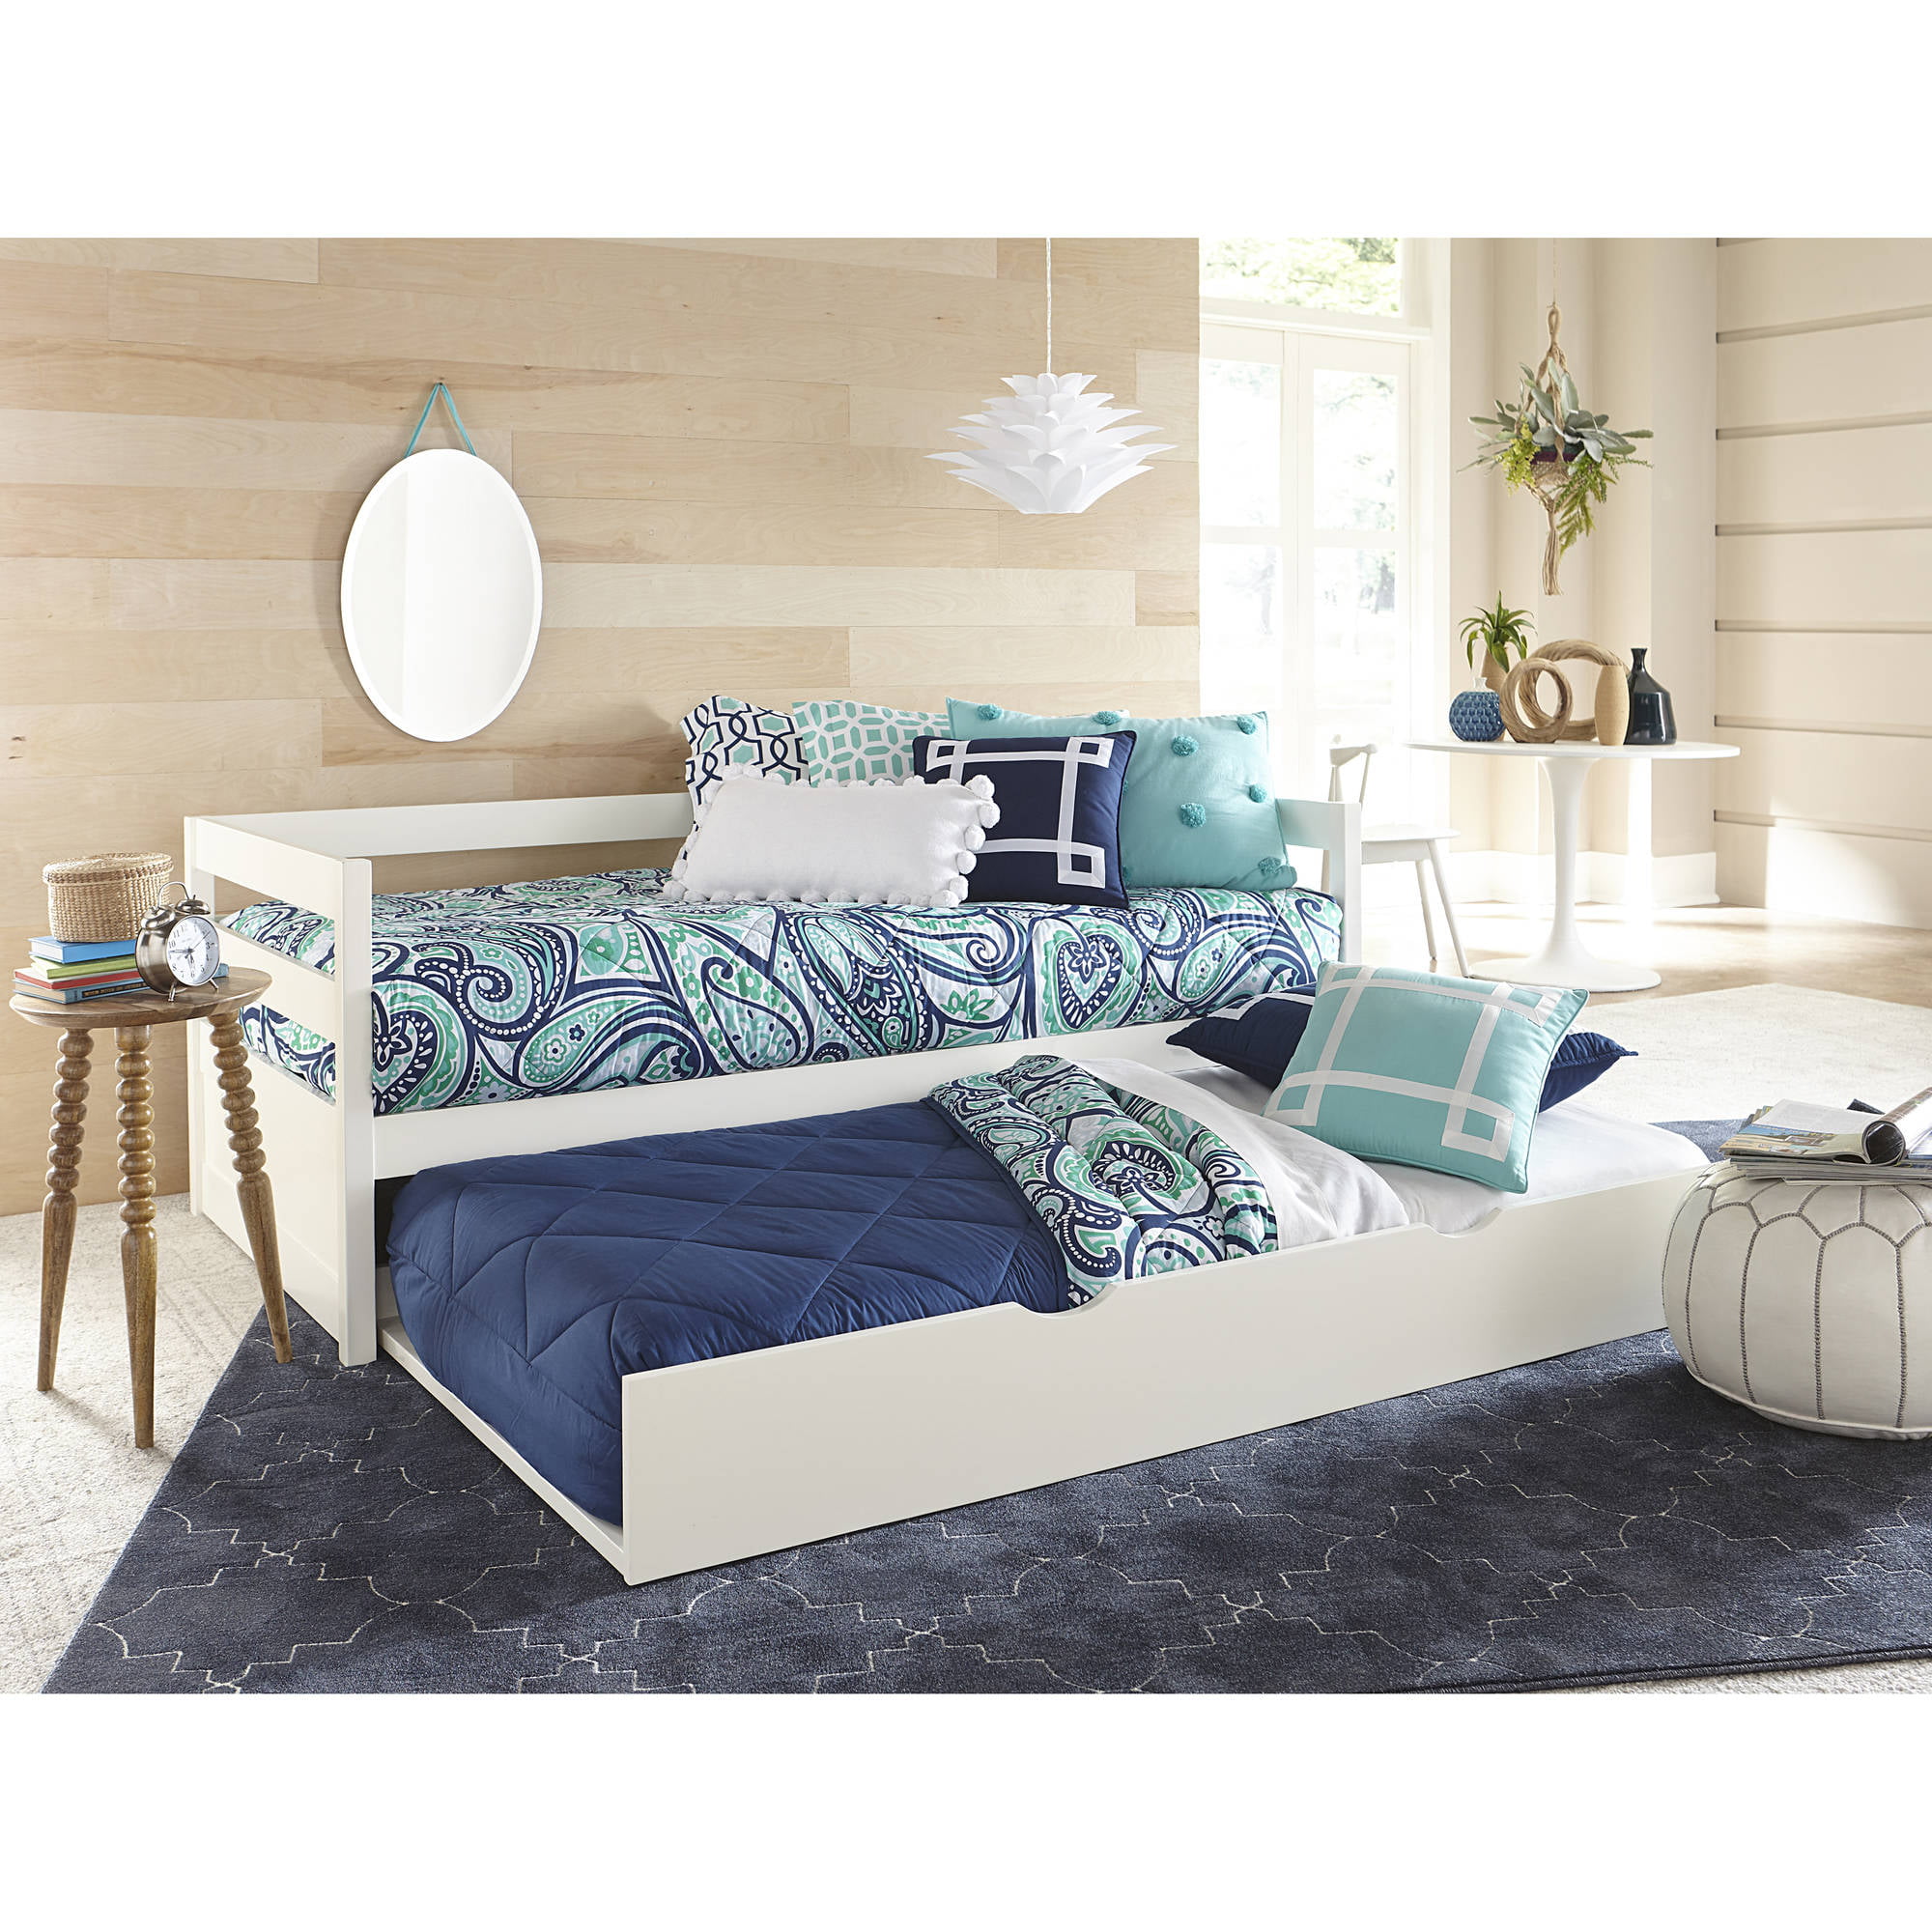 trundle day bed canada